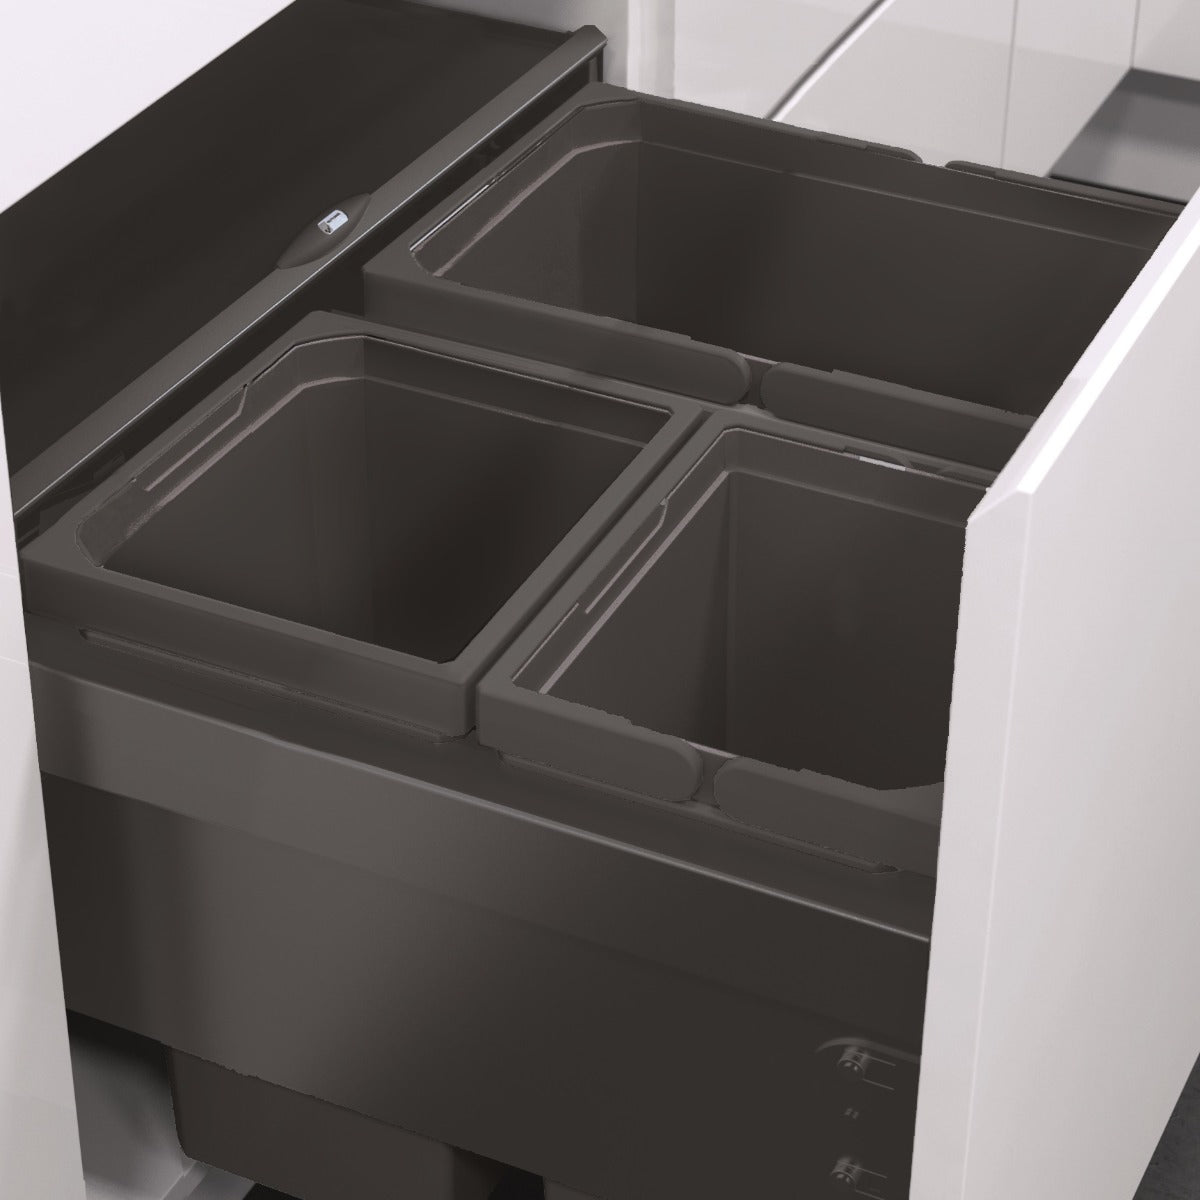 This Vauth-Sagel ES-Pro 46L In-cupboard Recycling Bin has 3-Compartments to separate out waste and recycling